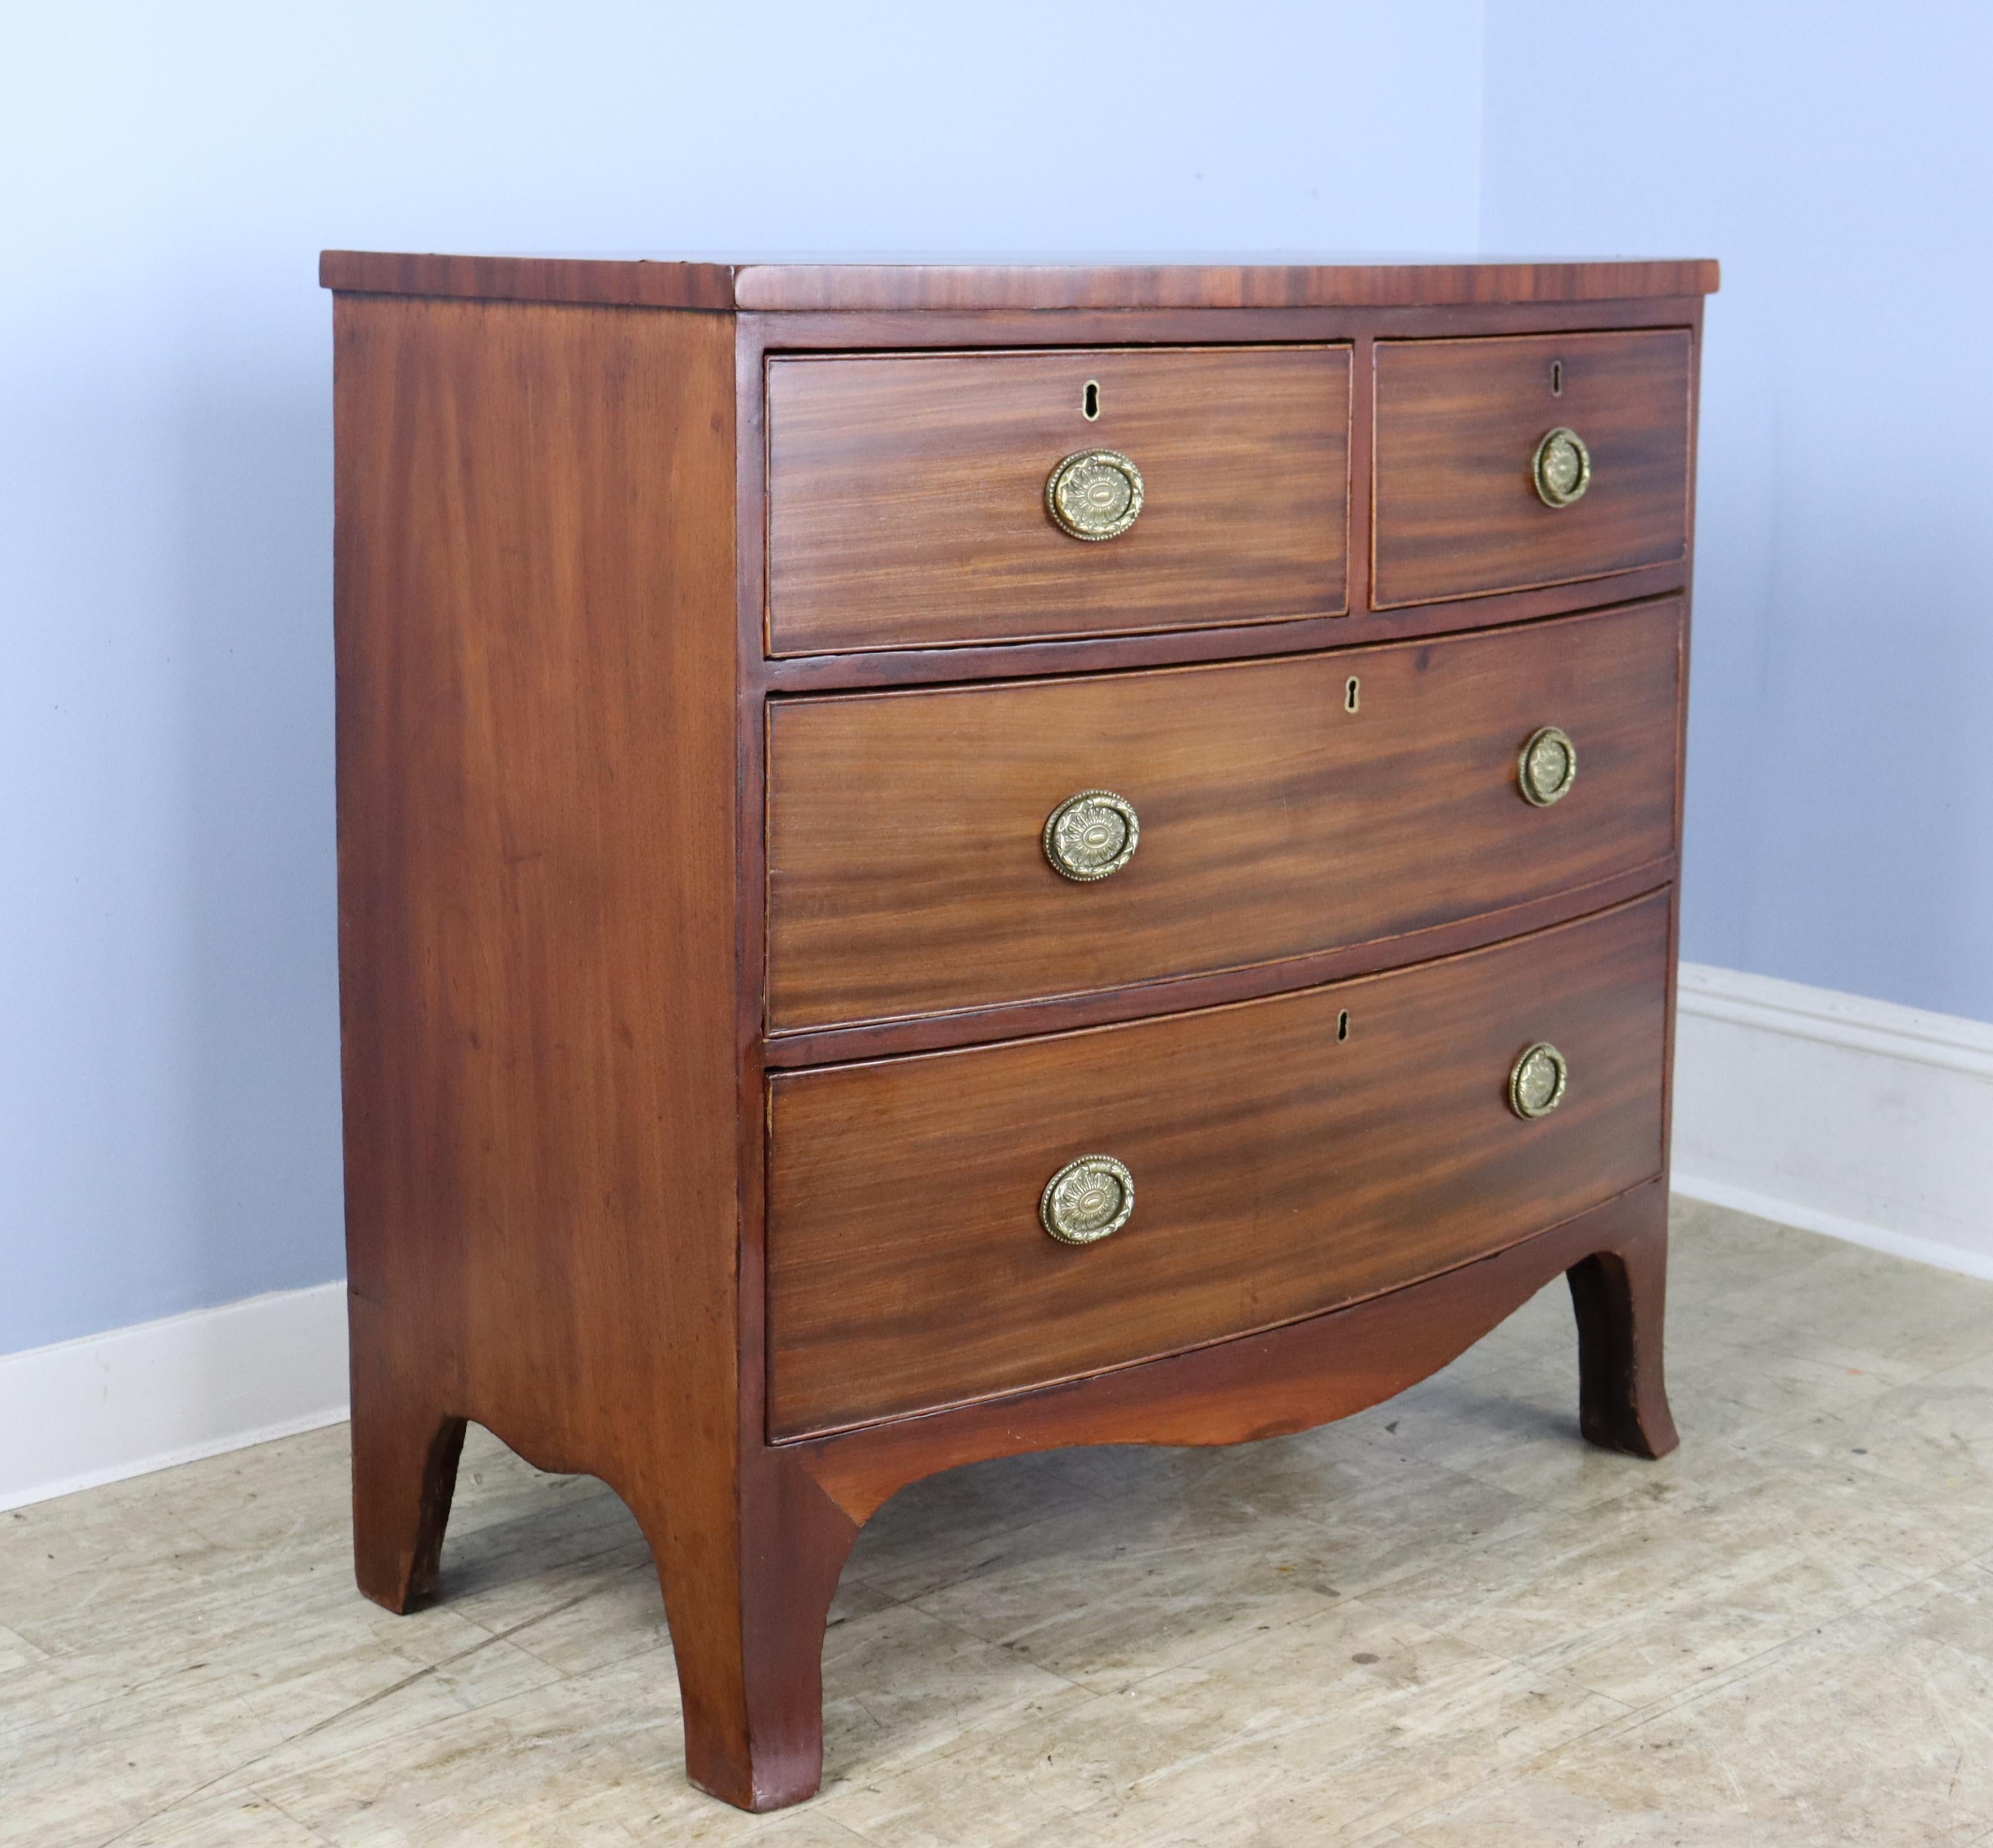 An antique bowfront mahogany bureau from England. Note the dramatic veneer around the tea-caddy top as well as the cockbeaded edging around the drawers, which are quite clean on the interior. The mahogany of this dresser has a beautiful grain and